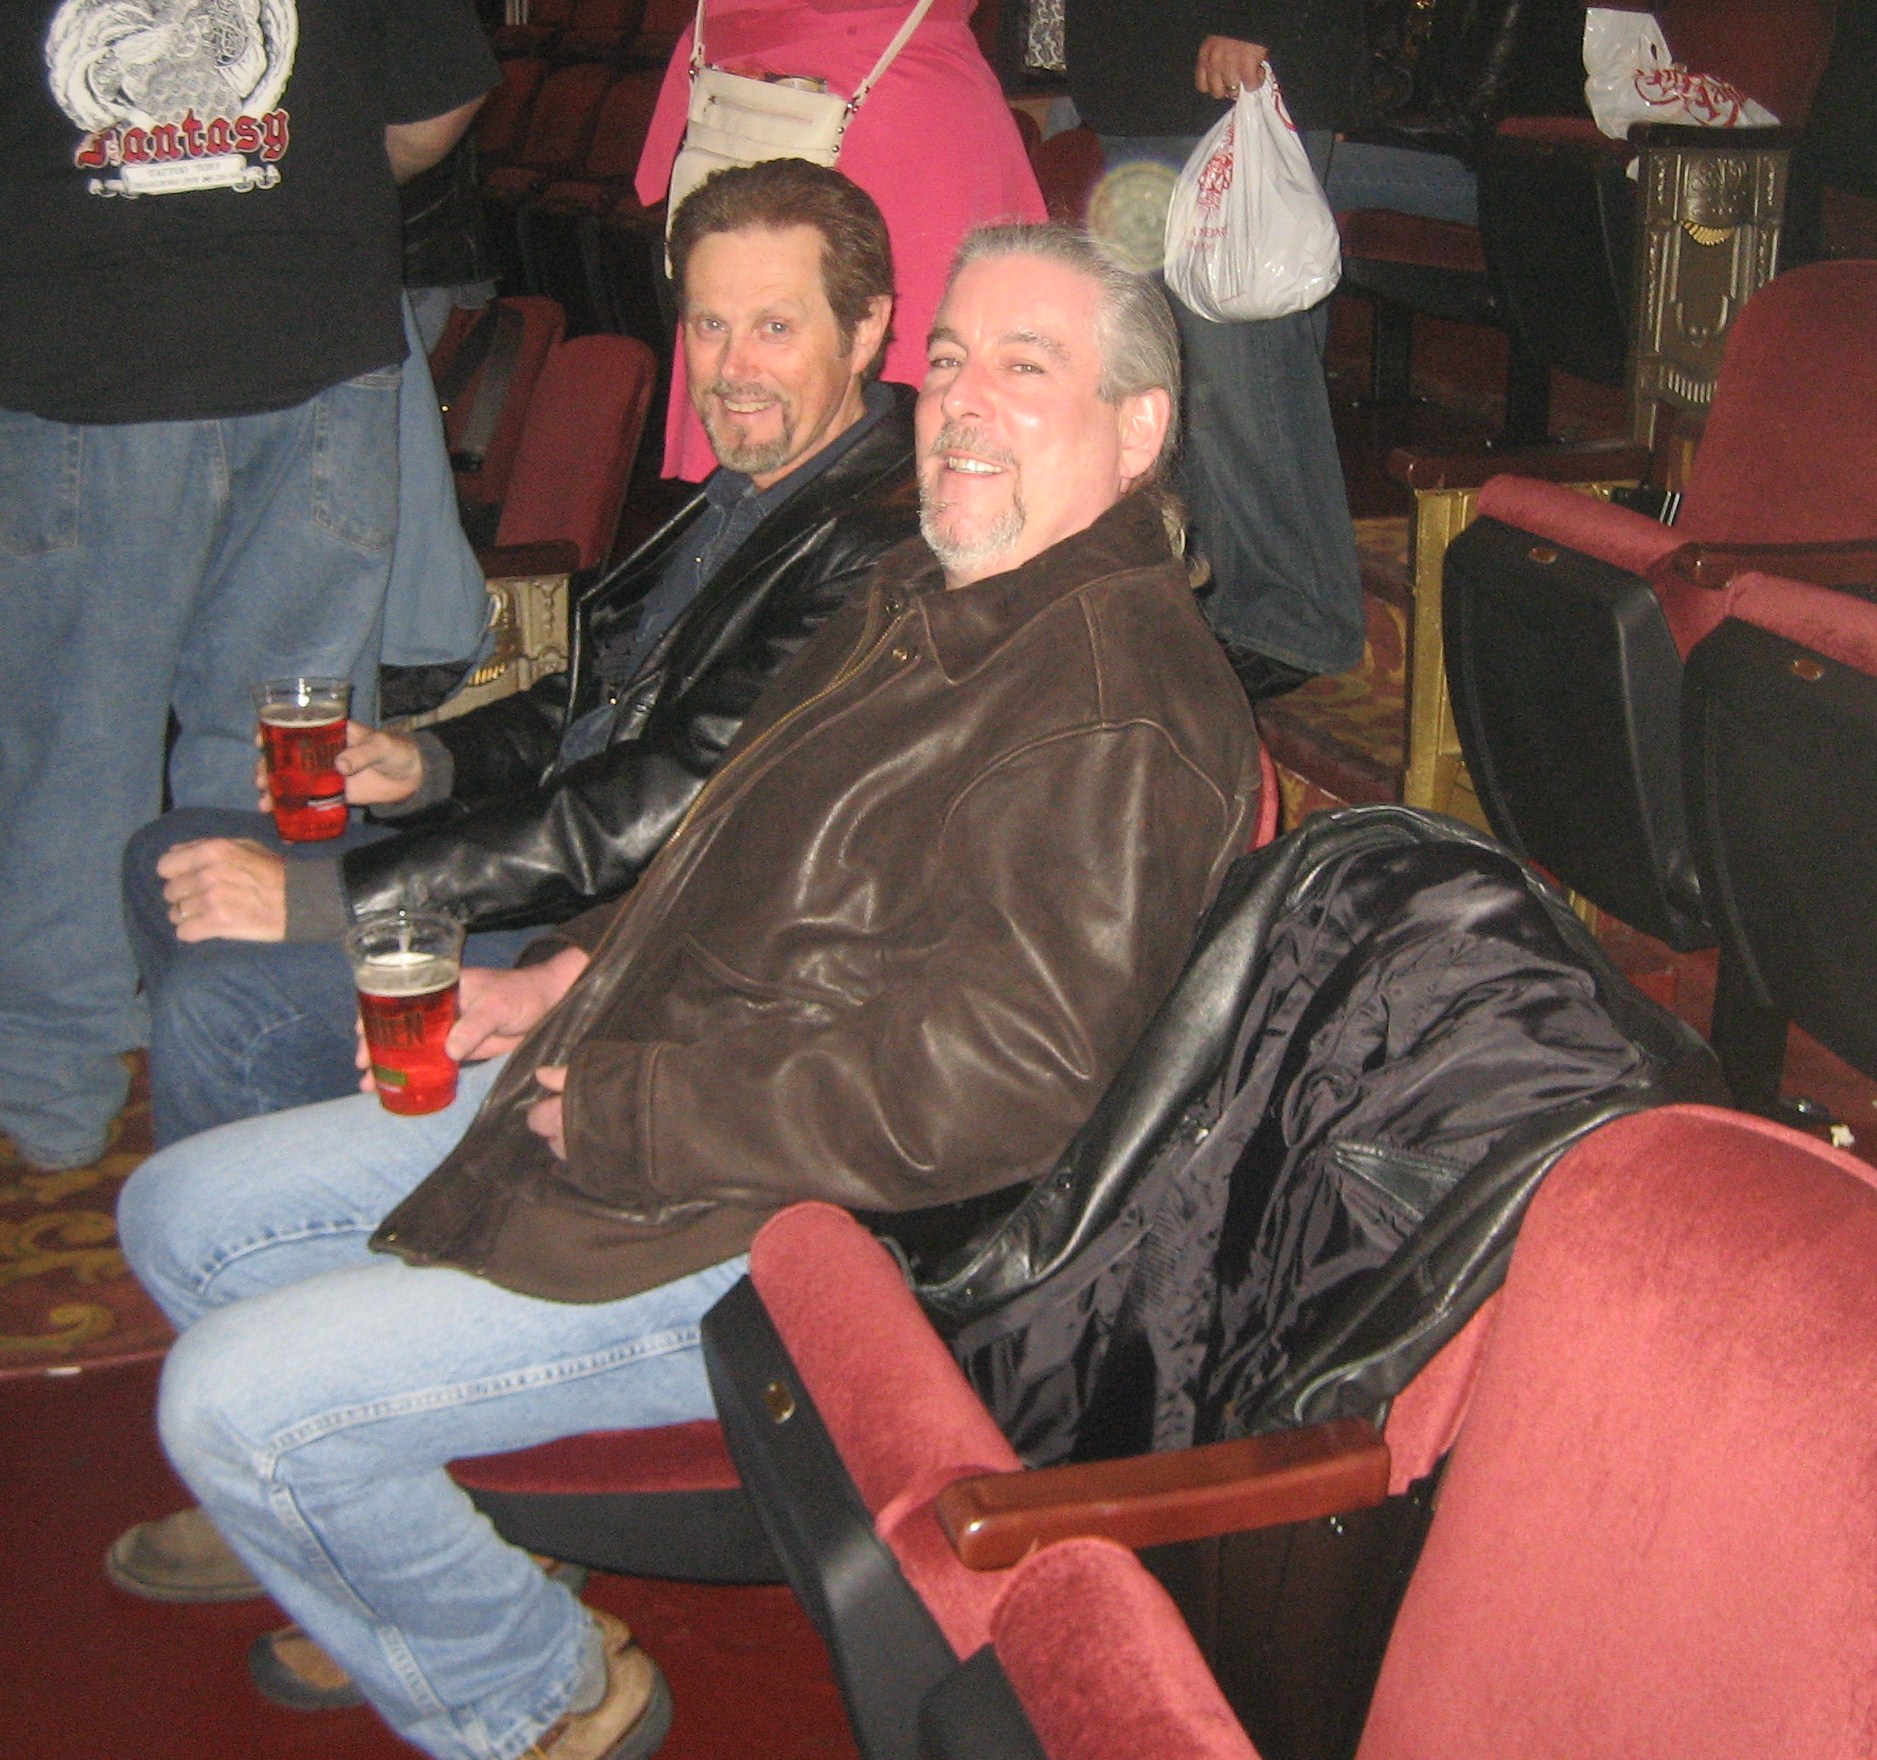 Joe and Pat: March 21, 2009 in the loge, second row BEACON.